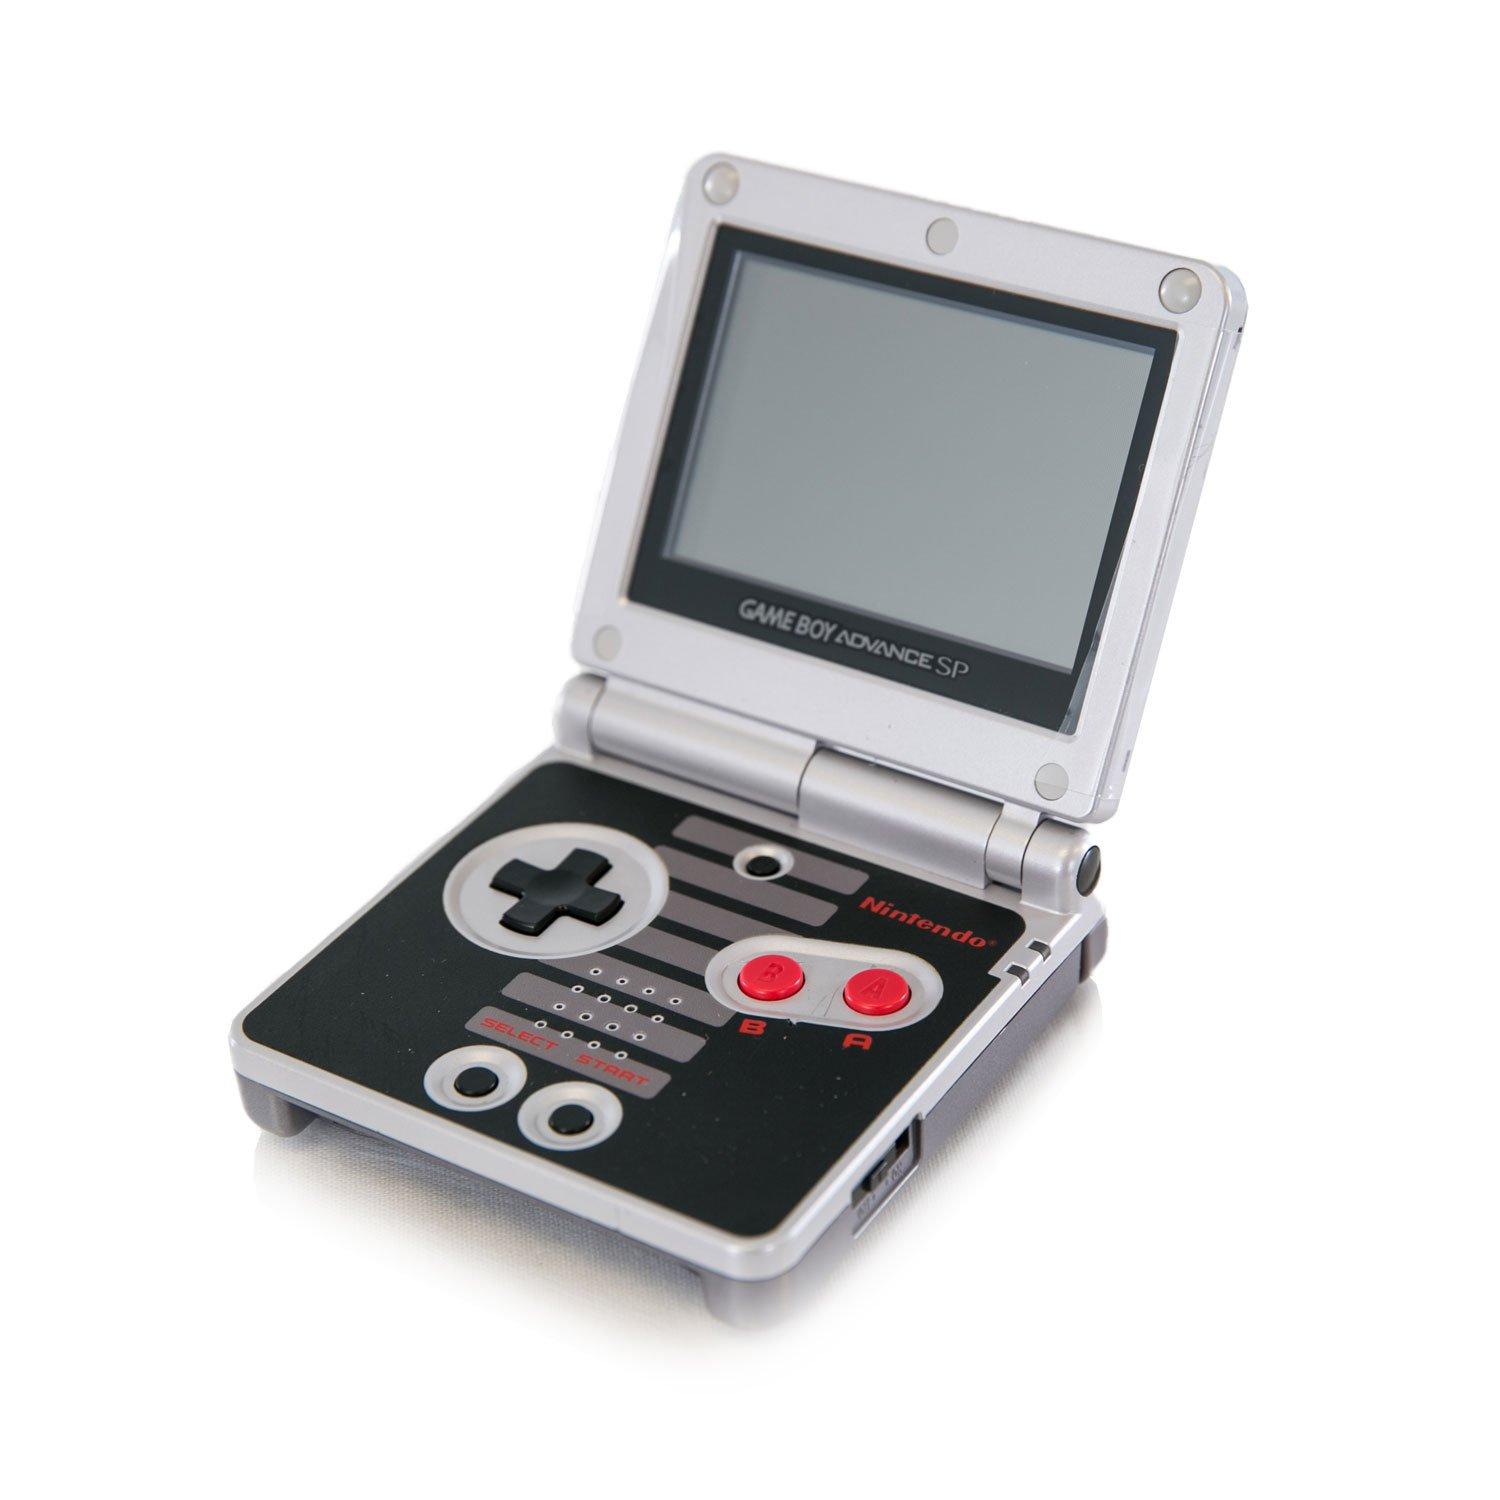 gameboy advance sp release price